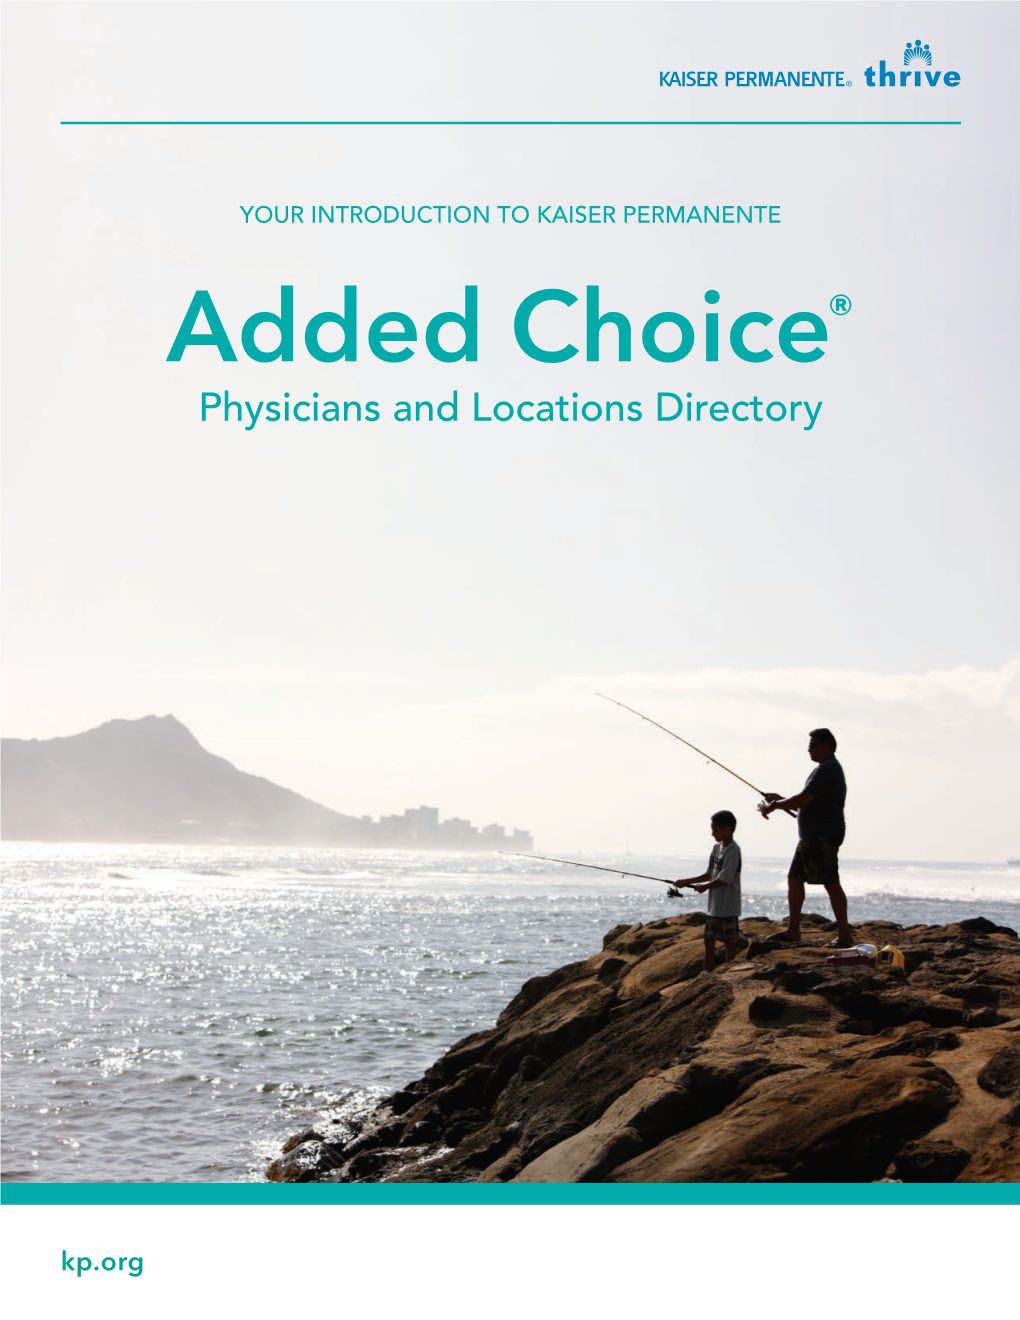 Added Choice® Physicians and Locations Directory